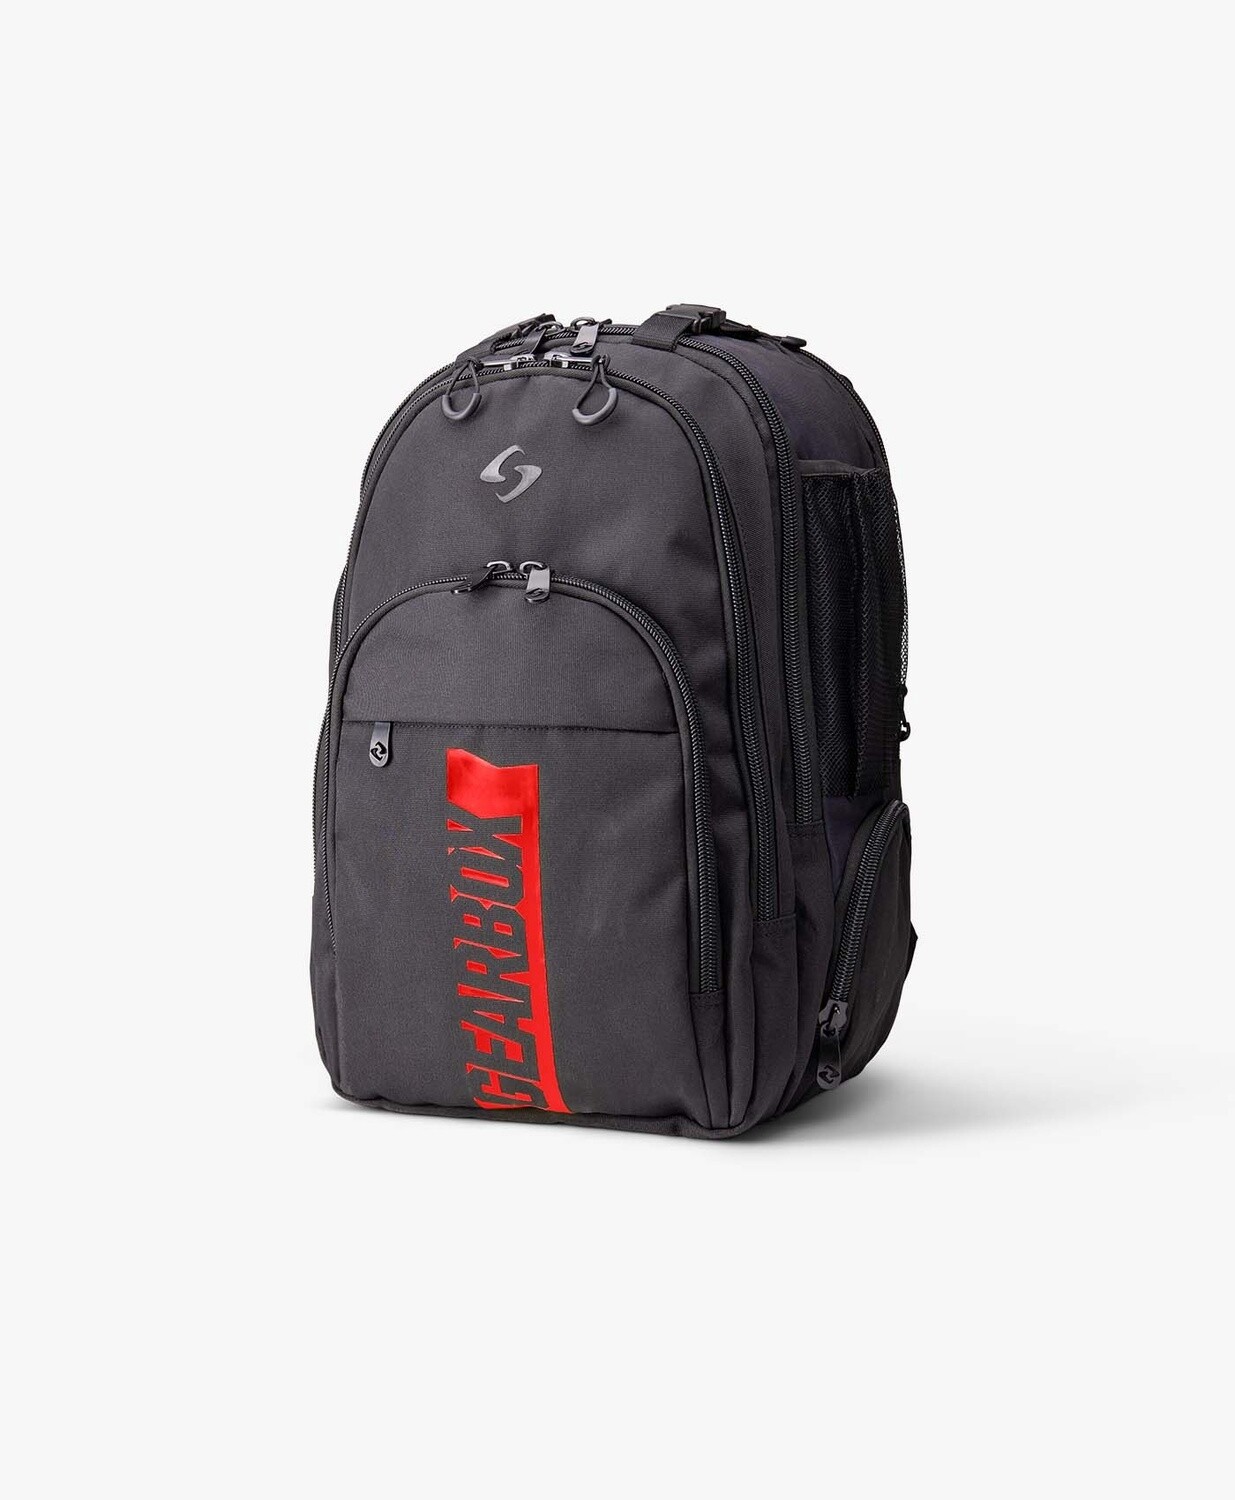 Gearbox Core Collection Backpack, Color: Black/Red